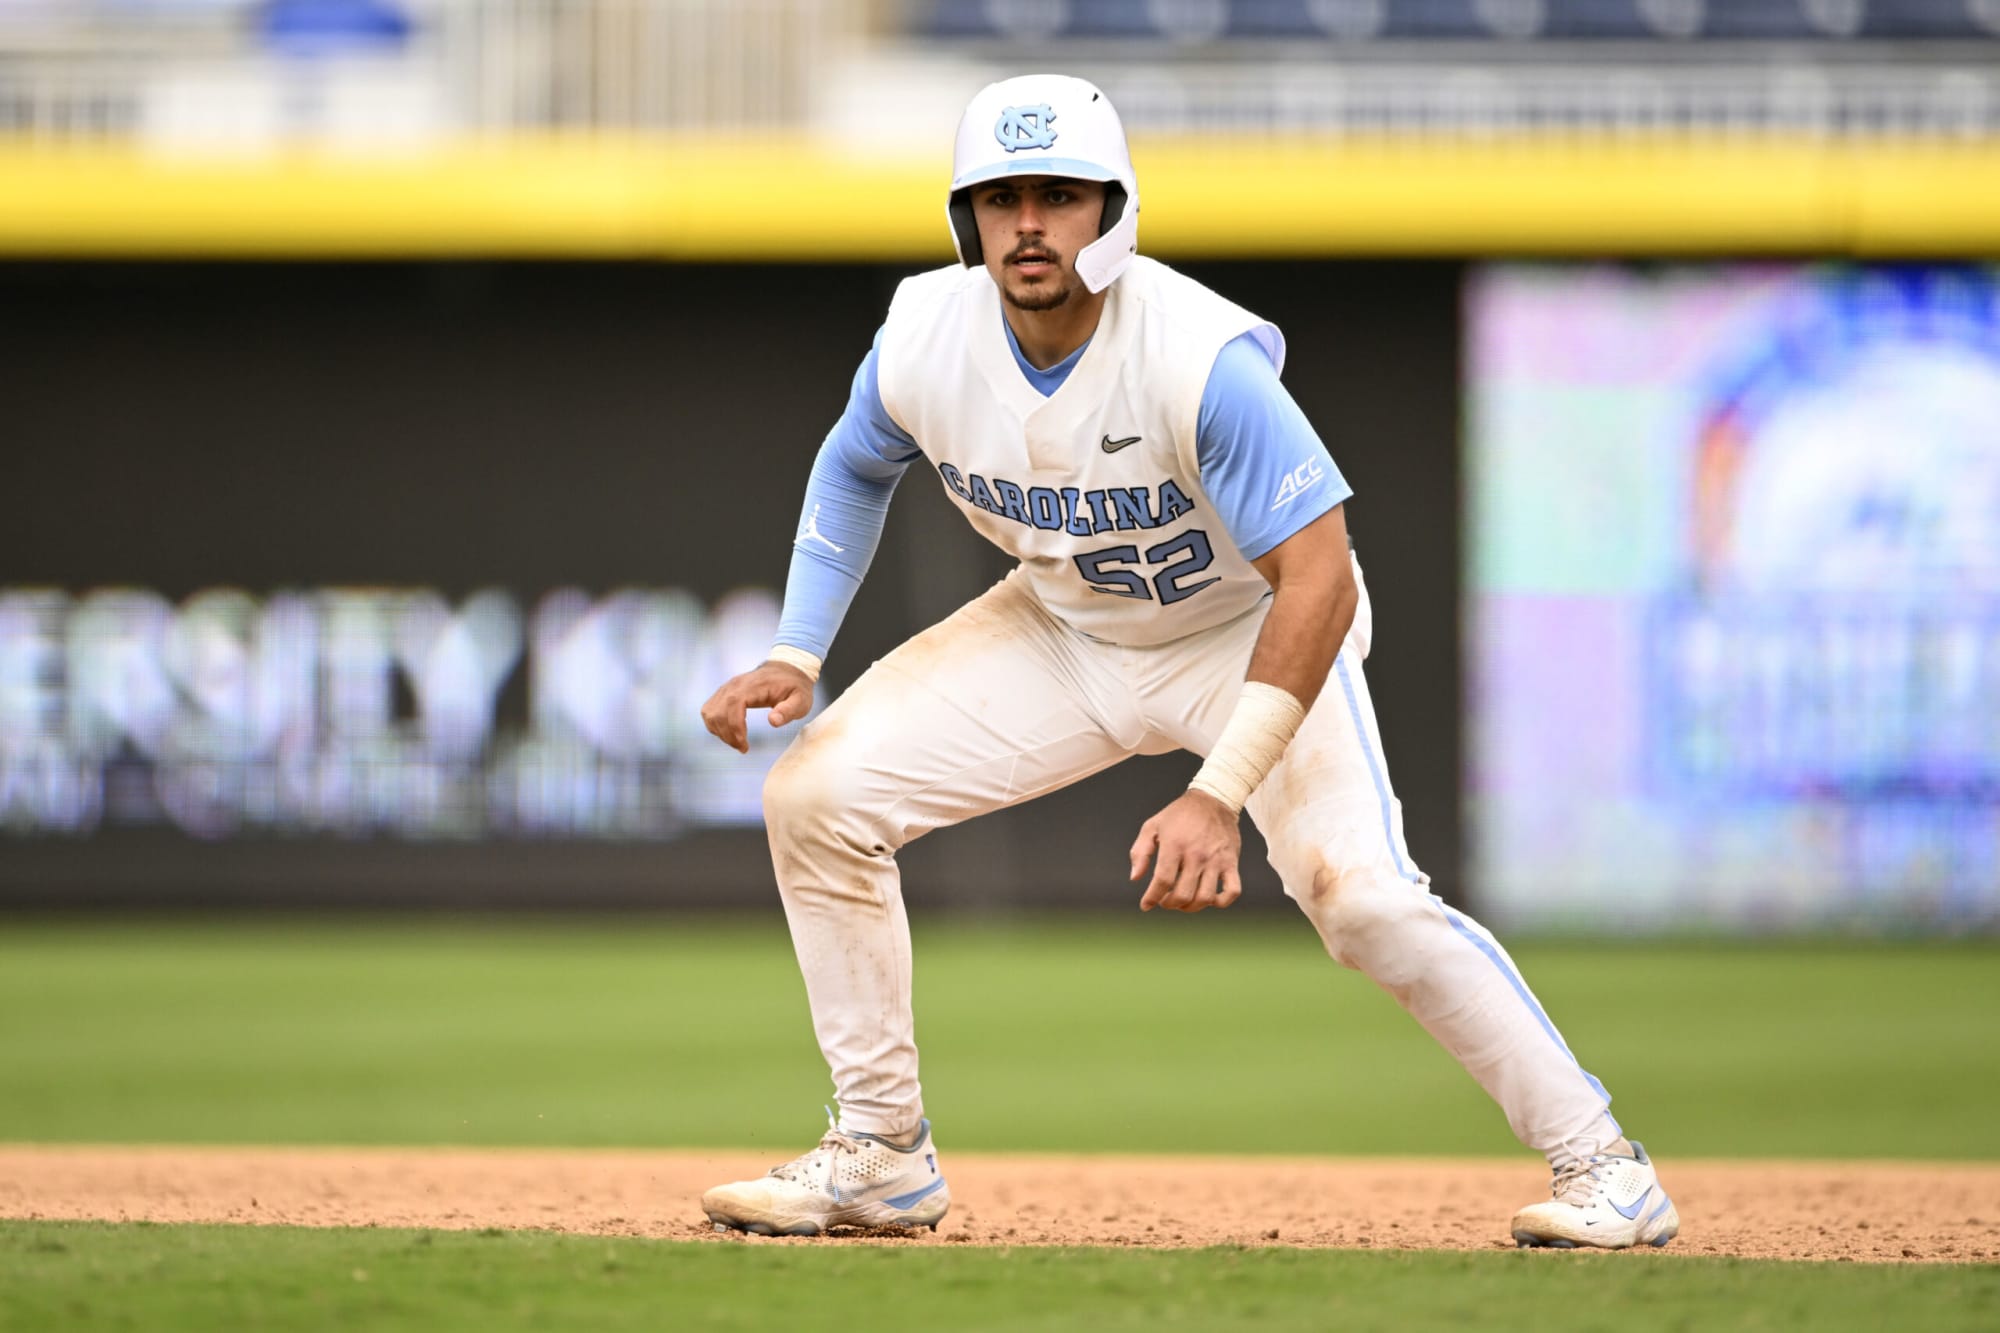 UNC Baseball: Tomas Frick drafted by New York Yankees - BVM Sports